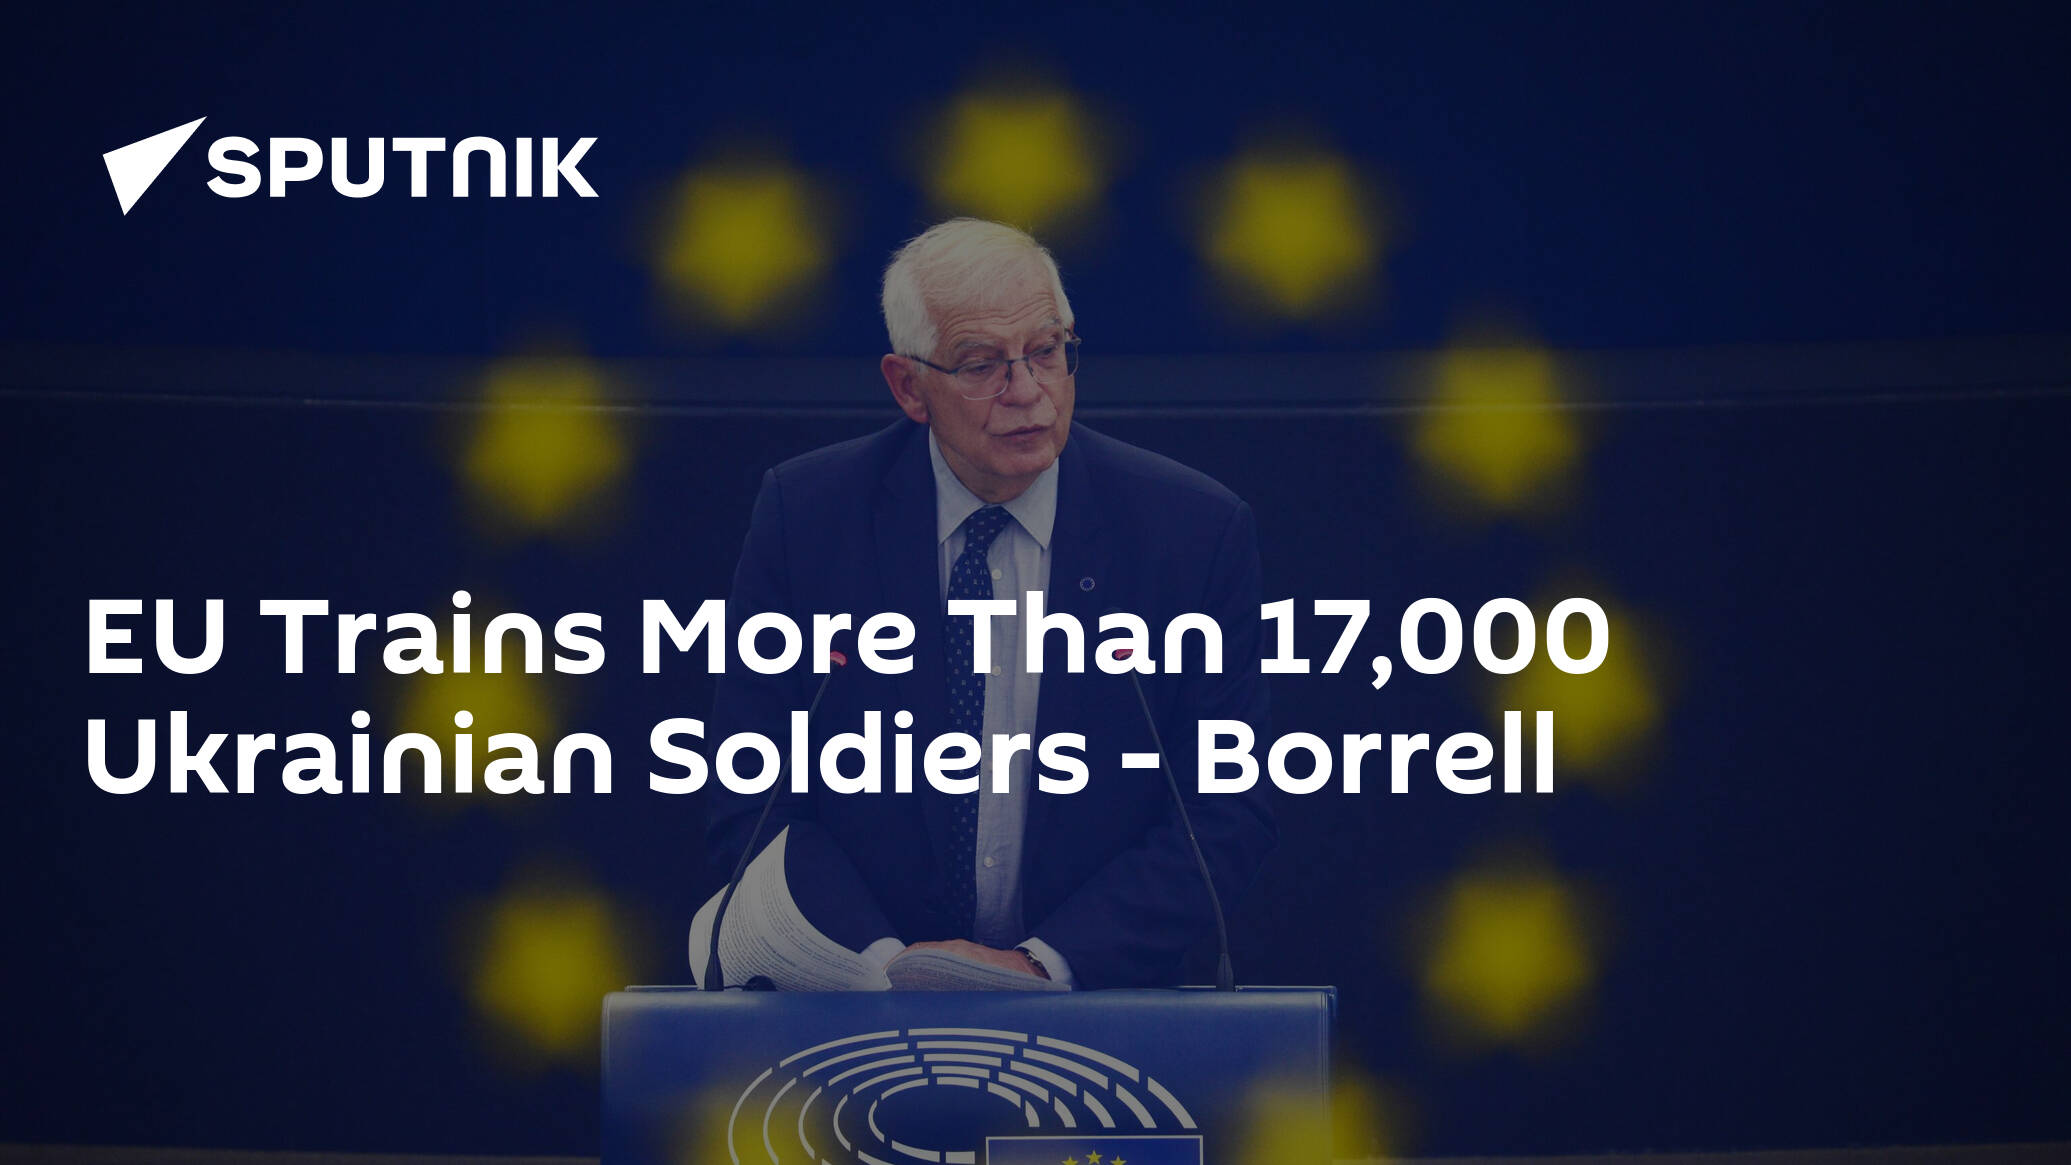 Total Assistance to Ukraine From EU States, Organizations Amounts to Over Bln – Borrell